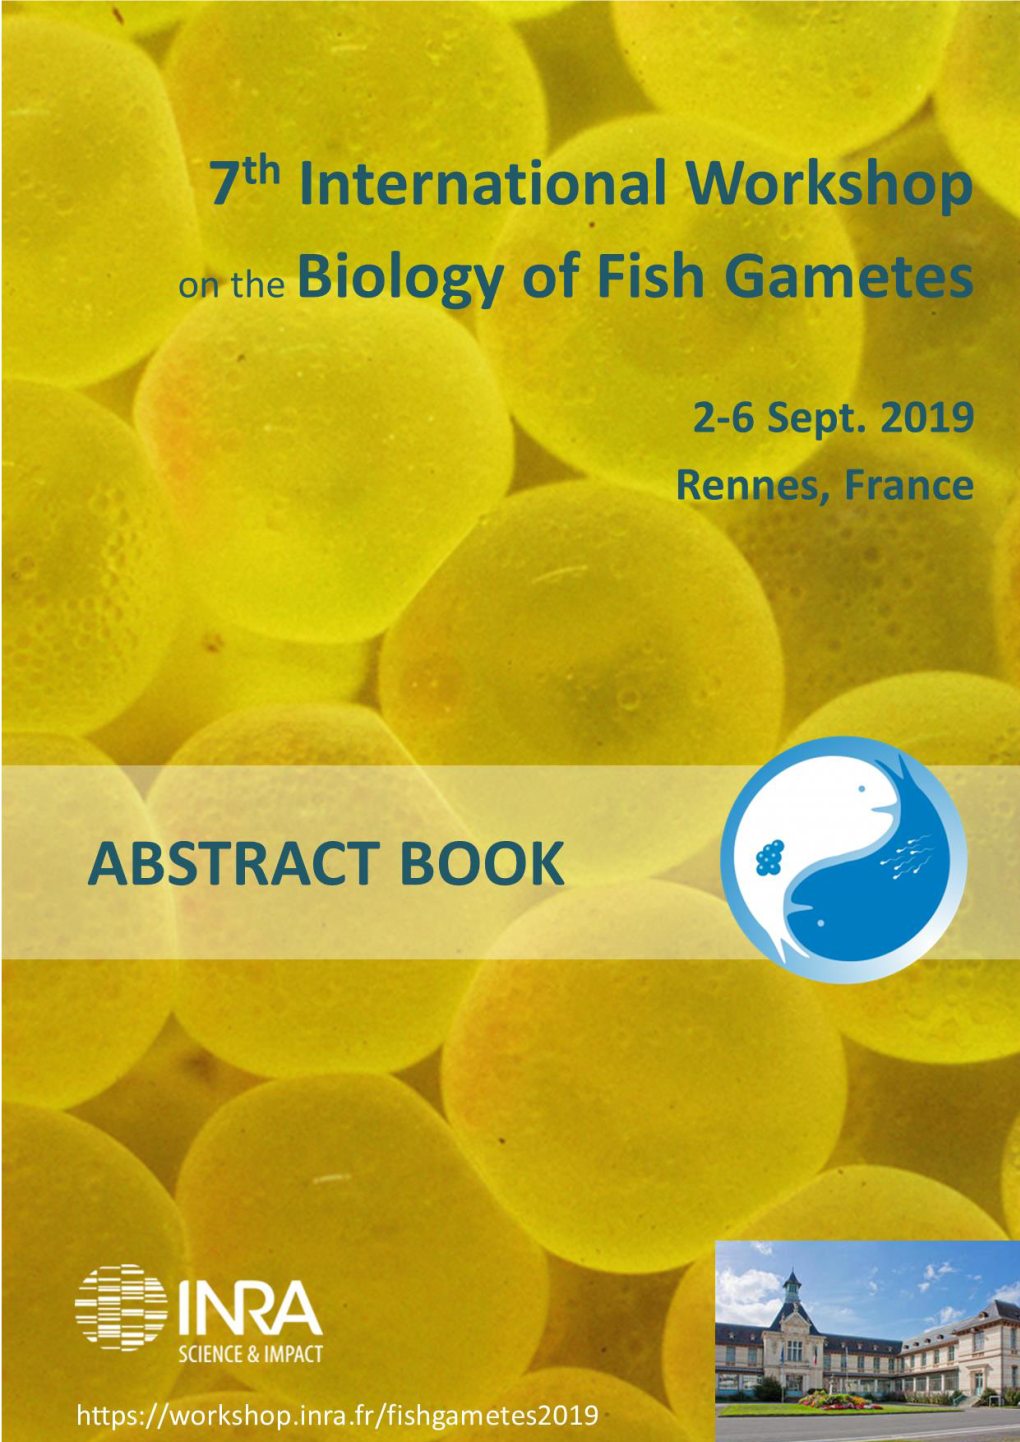 Download the Abstract Book